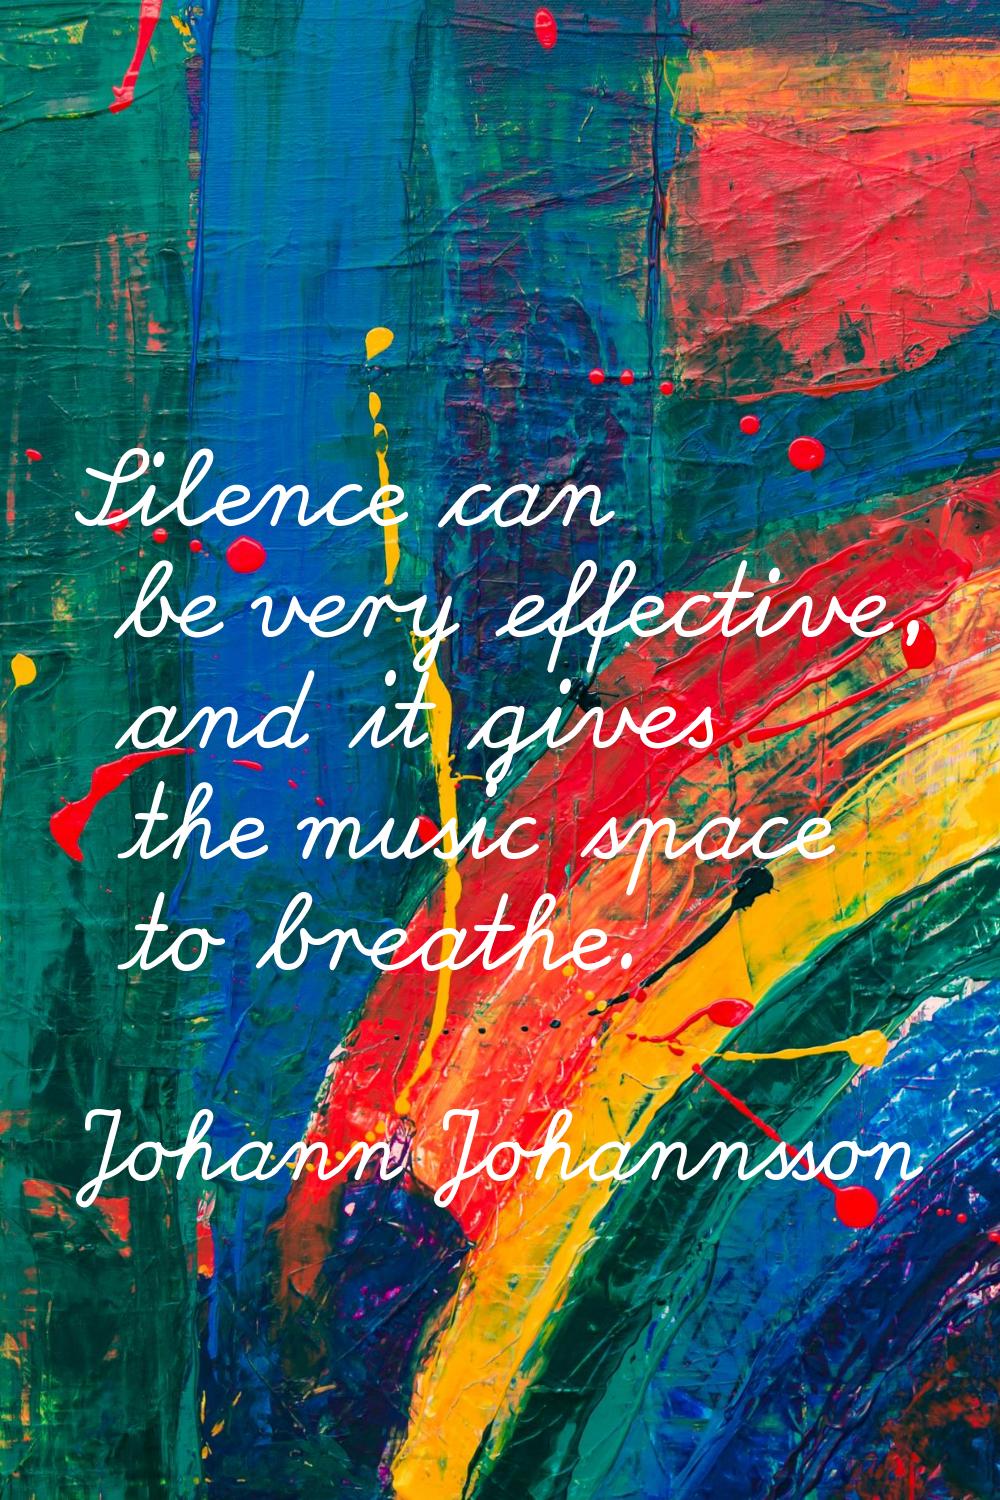 Silence can be very effective, and it gives the music space to breathe.